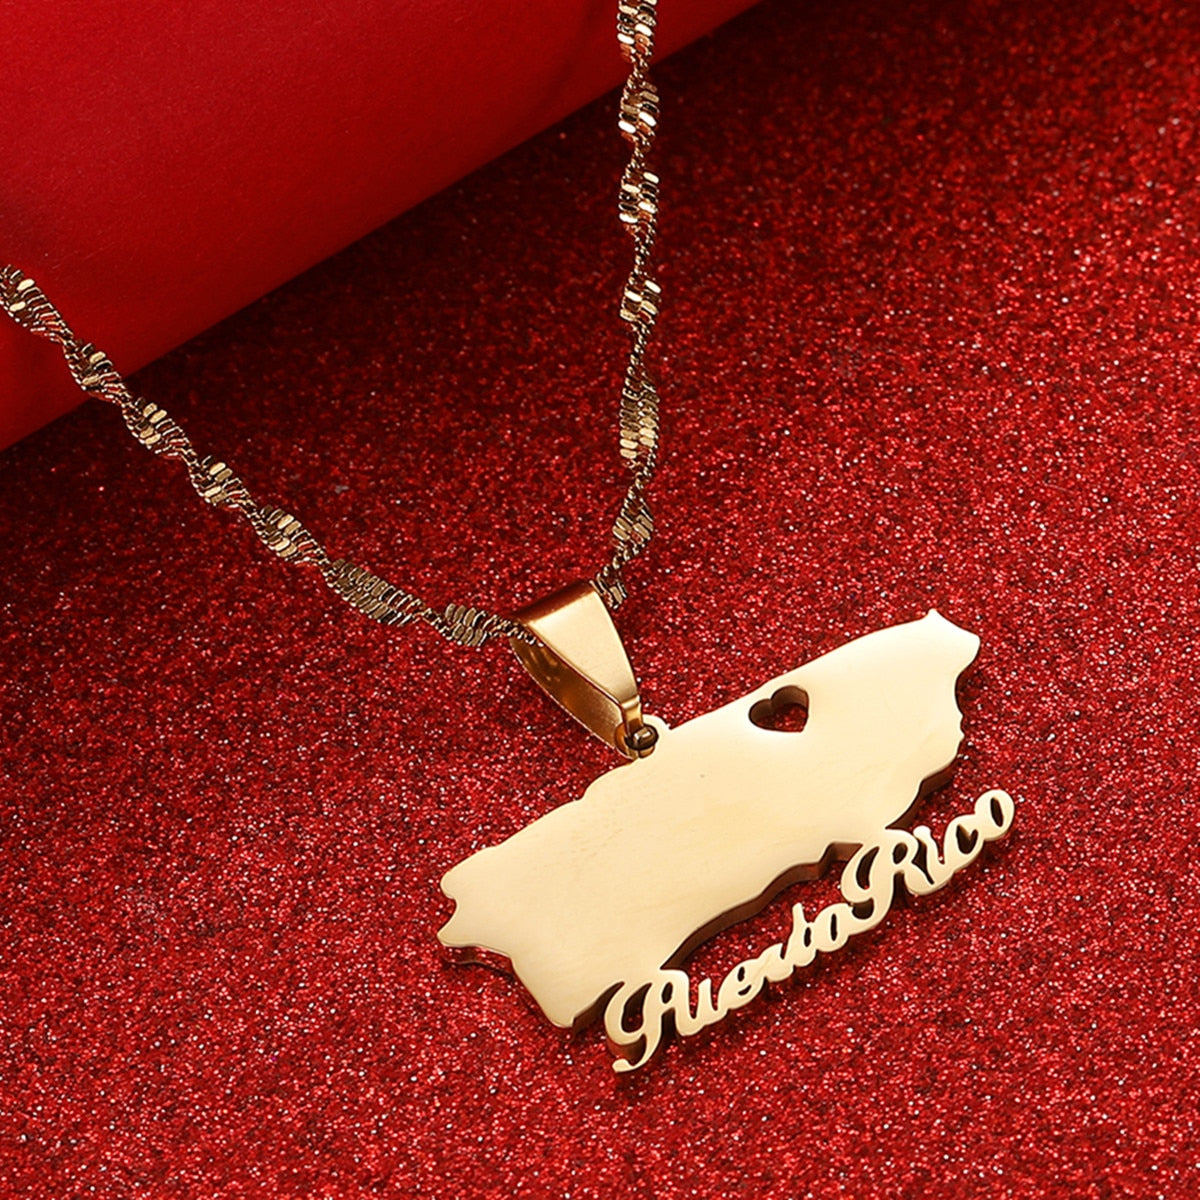 Puerto Rico With Heart Map Pendant Necklaces Gold Color PR Puerto Ricans Jewelry Gift